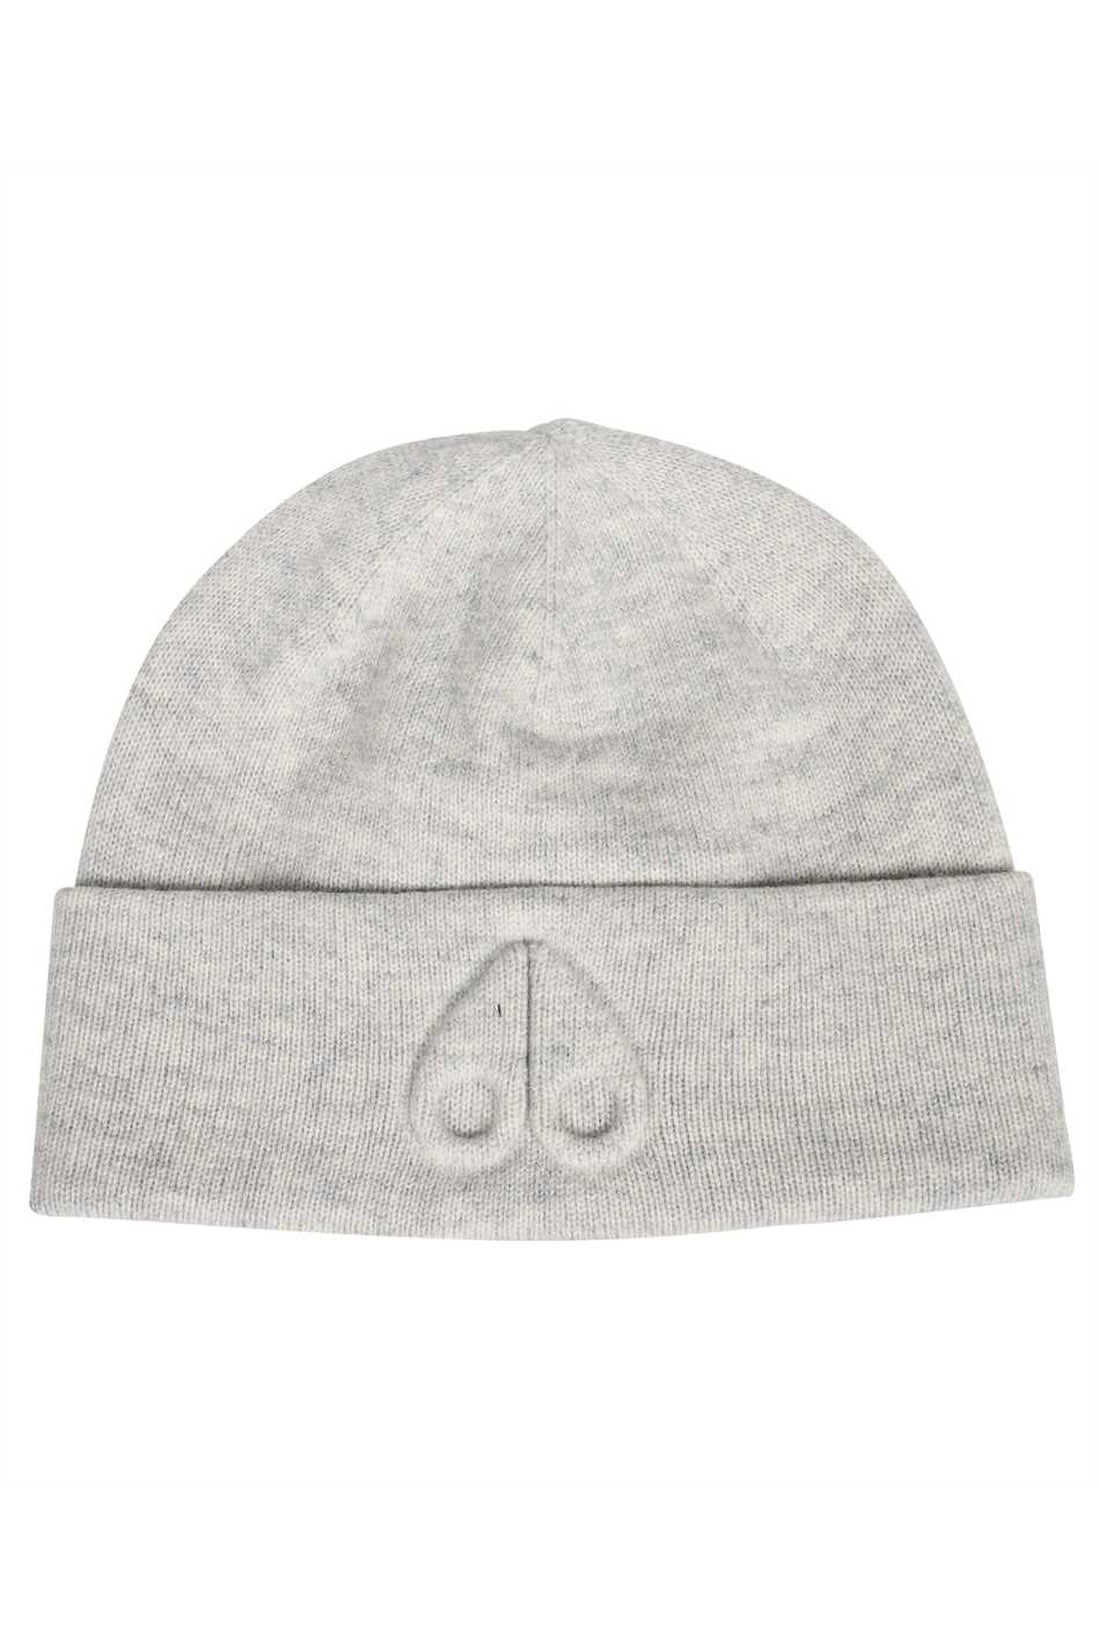 Moose Knuckles-OUTLET-SALE-Beanie knitted beanie-ARCHIVIST